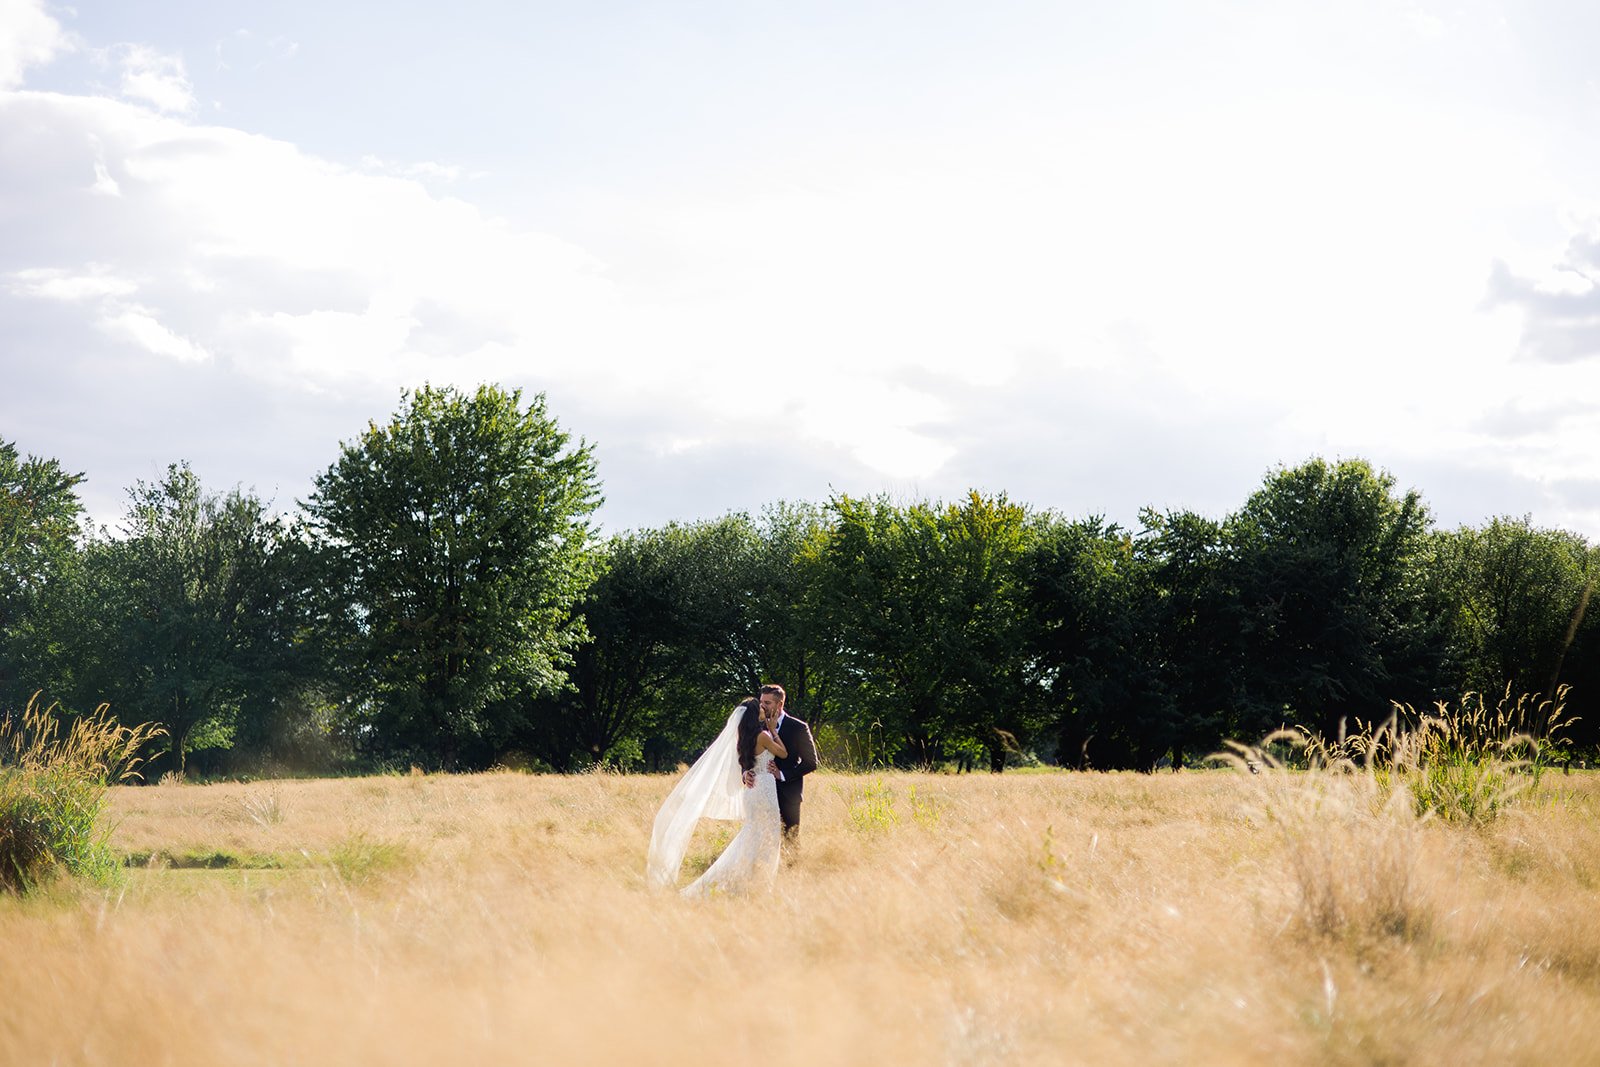 bridal veil wafts in wind amid long romantic grass during photoshoot in Vancouver British Columbia 